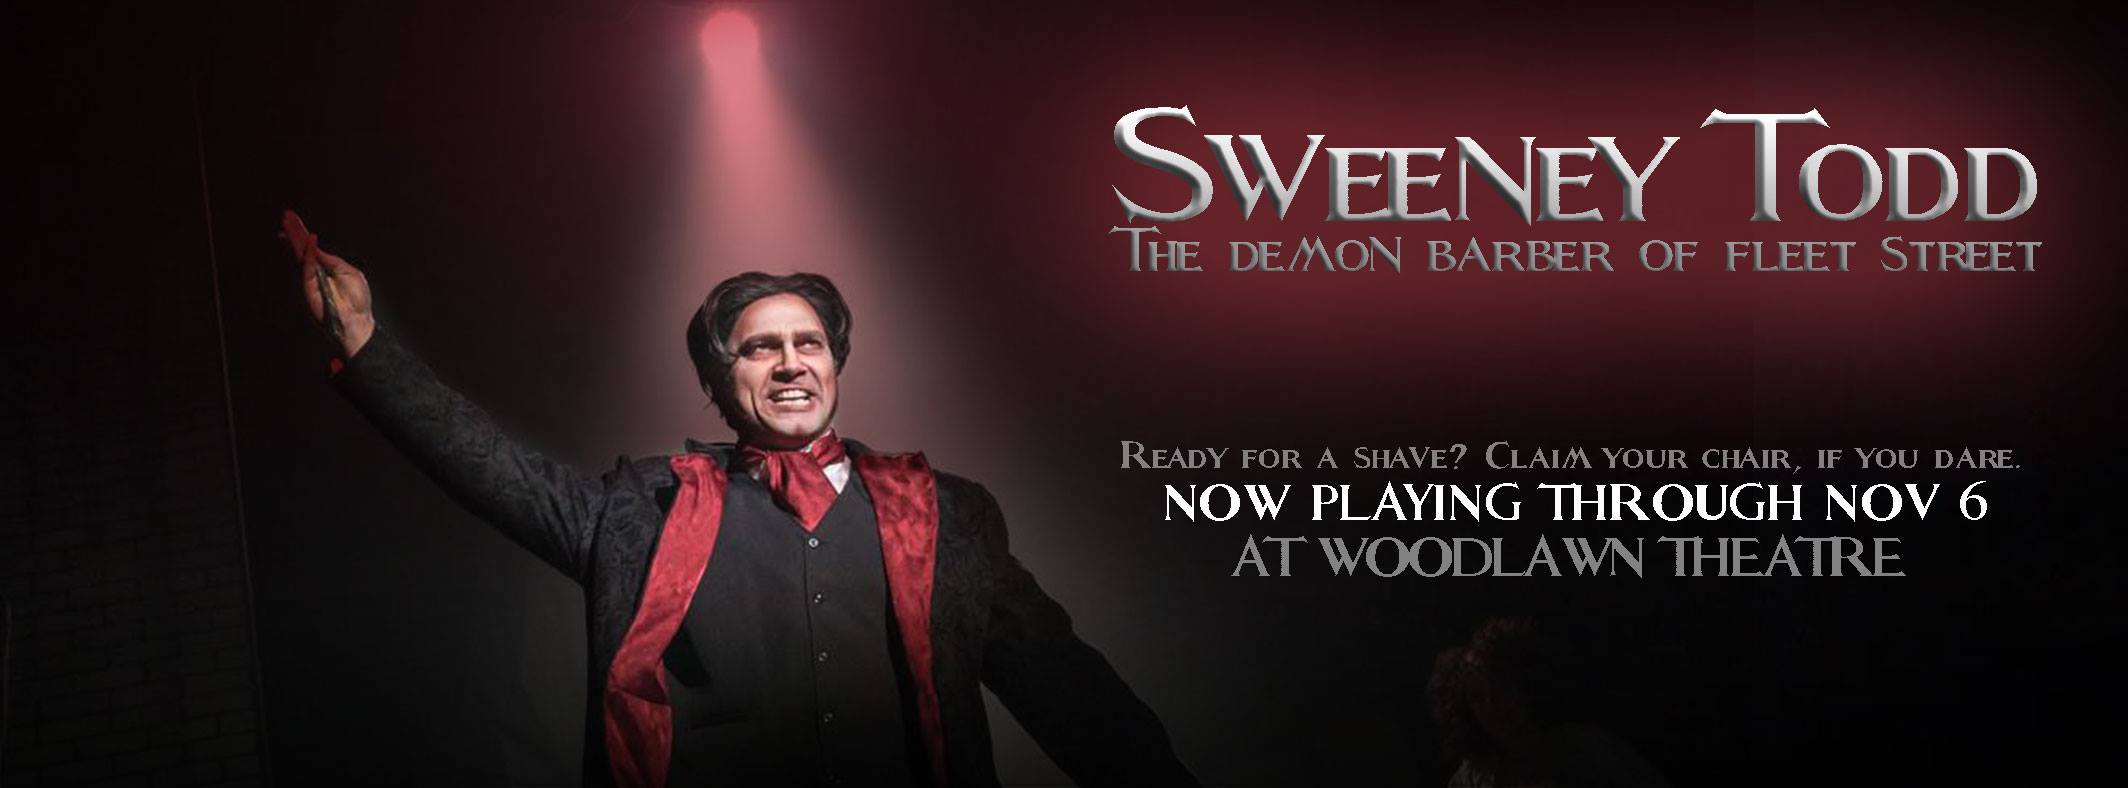 Sweeney Todd by Wonder Theatre (formerly Woodlawn Theatre)